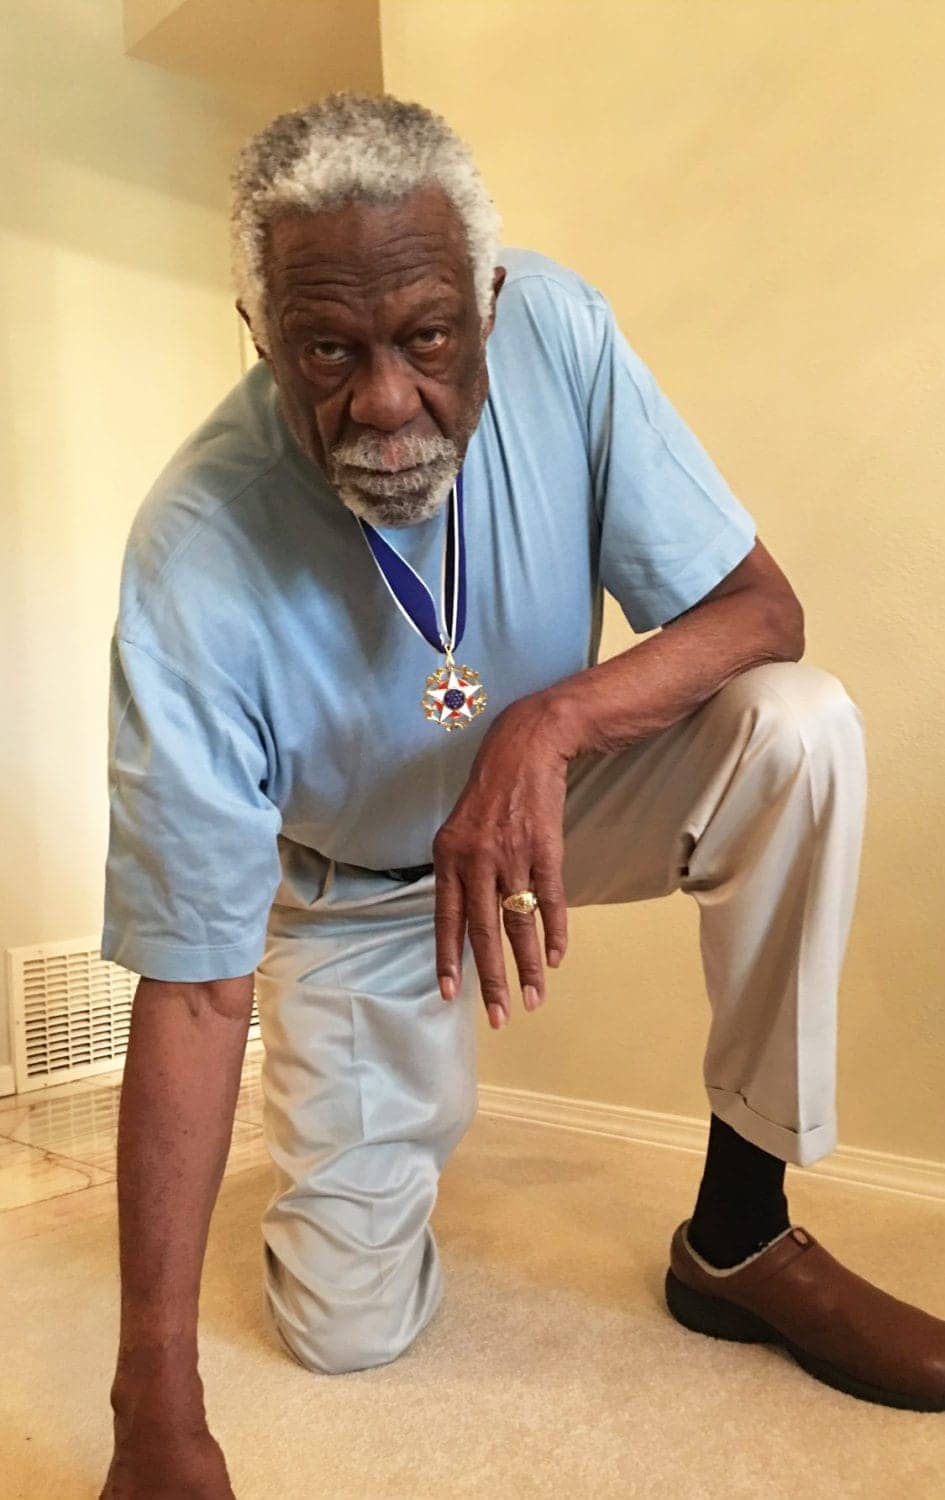 Bill-Russell-takes-a-knee-wearing-PresidentIal-Medal-of-Freedom-from-Obama-092617-by-Twitter-1, Bill Russell was a revolutionary, Culture Currents News & Views 